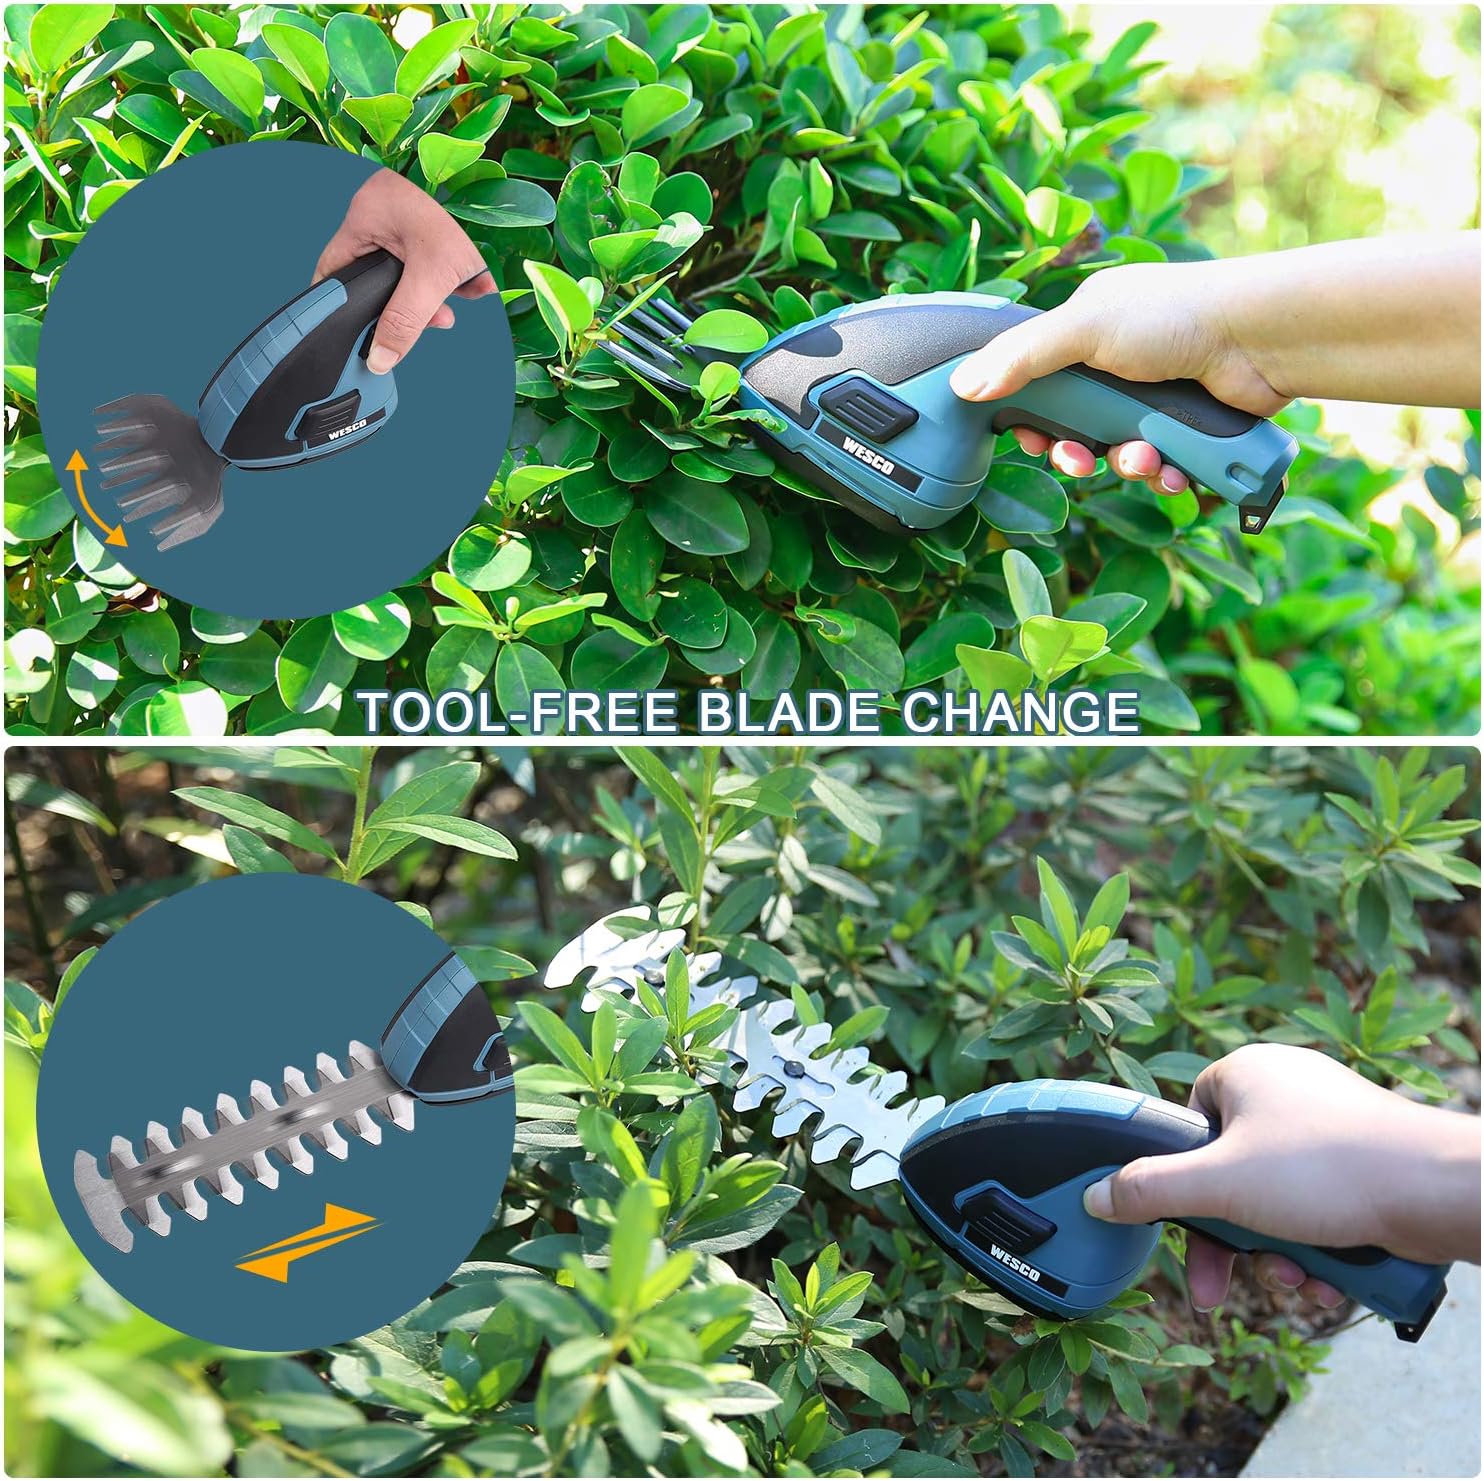 WESCO 7.2V Grass Shears Hedge Trimmer, 2-in-1 Handheld Shrub Trimmer with Rechargeable Lithium-ion Battery and Charger